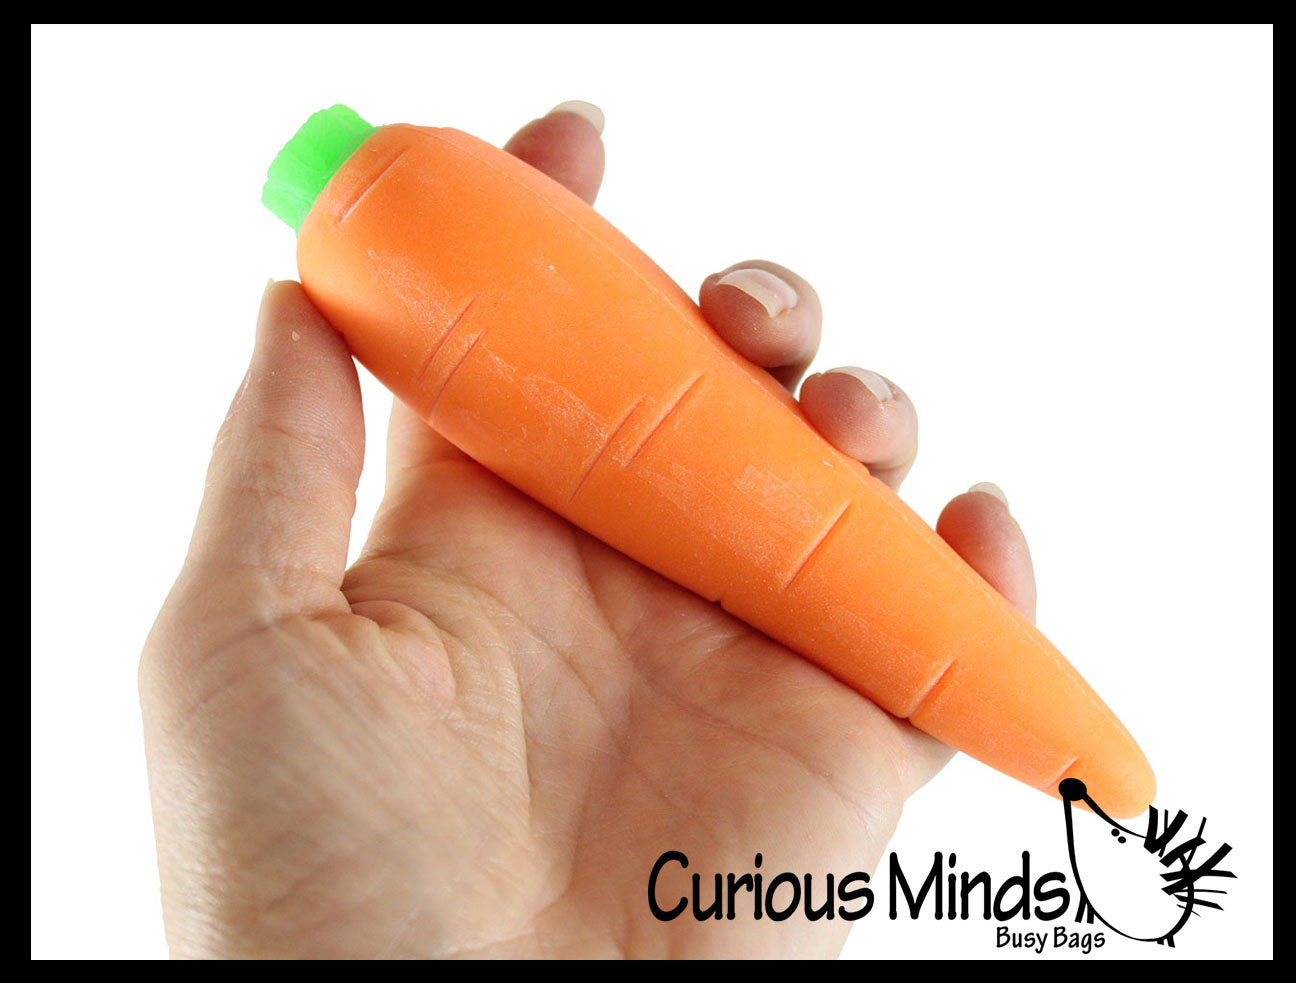 Sand Filled Squishy Carrot - Moldable Sensory, Stress, Squeeze Fidget Toy ADHD Special Needs Soothing